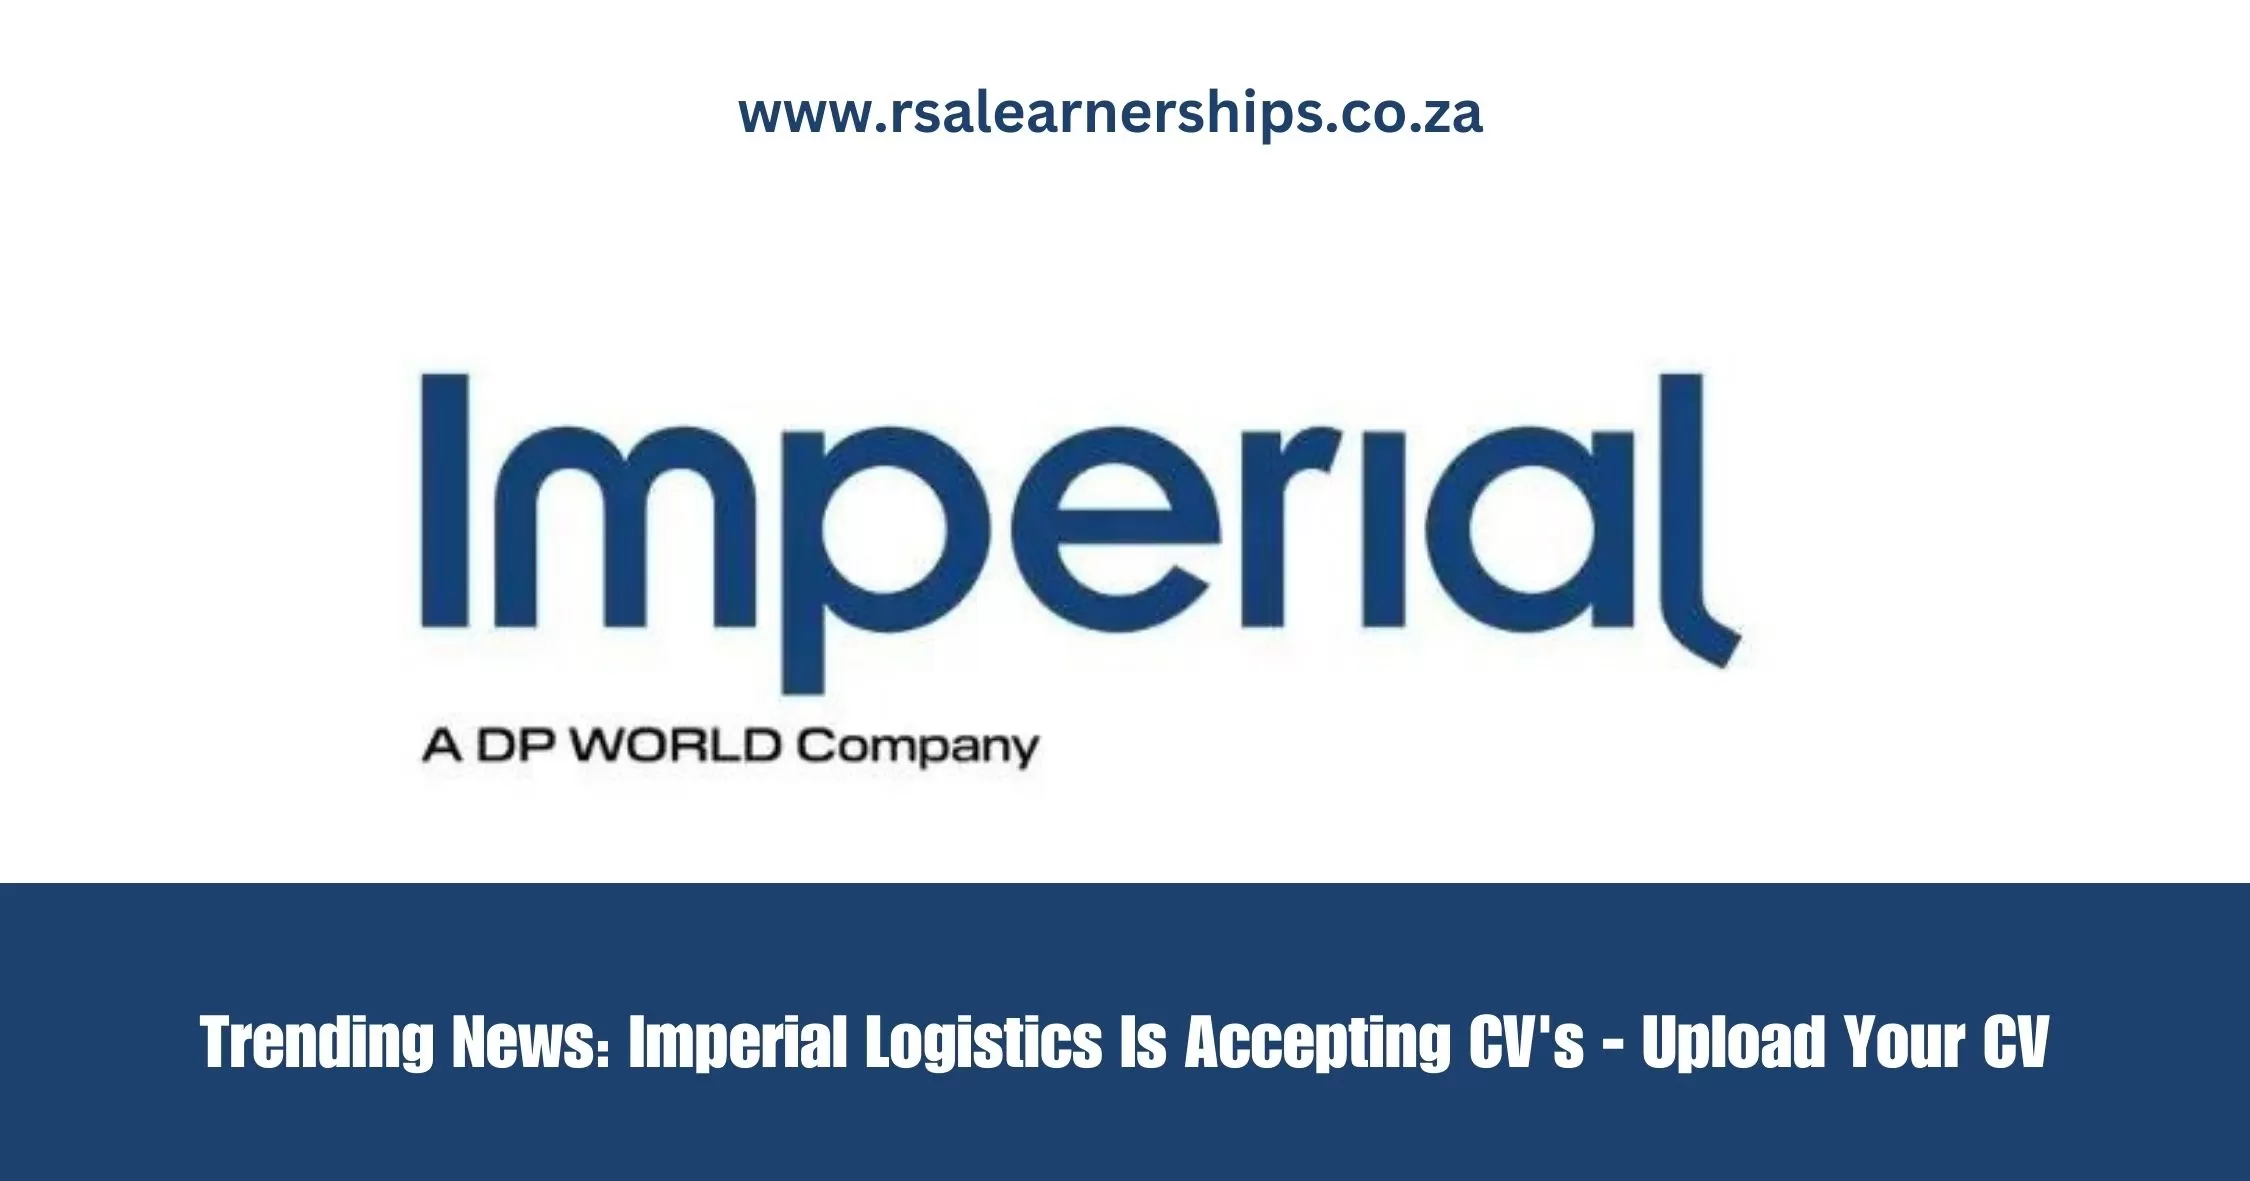 Trending News: Imperial Logistics Is Accepting CV's - Upload Your CV